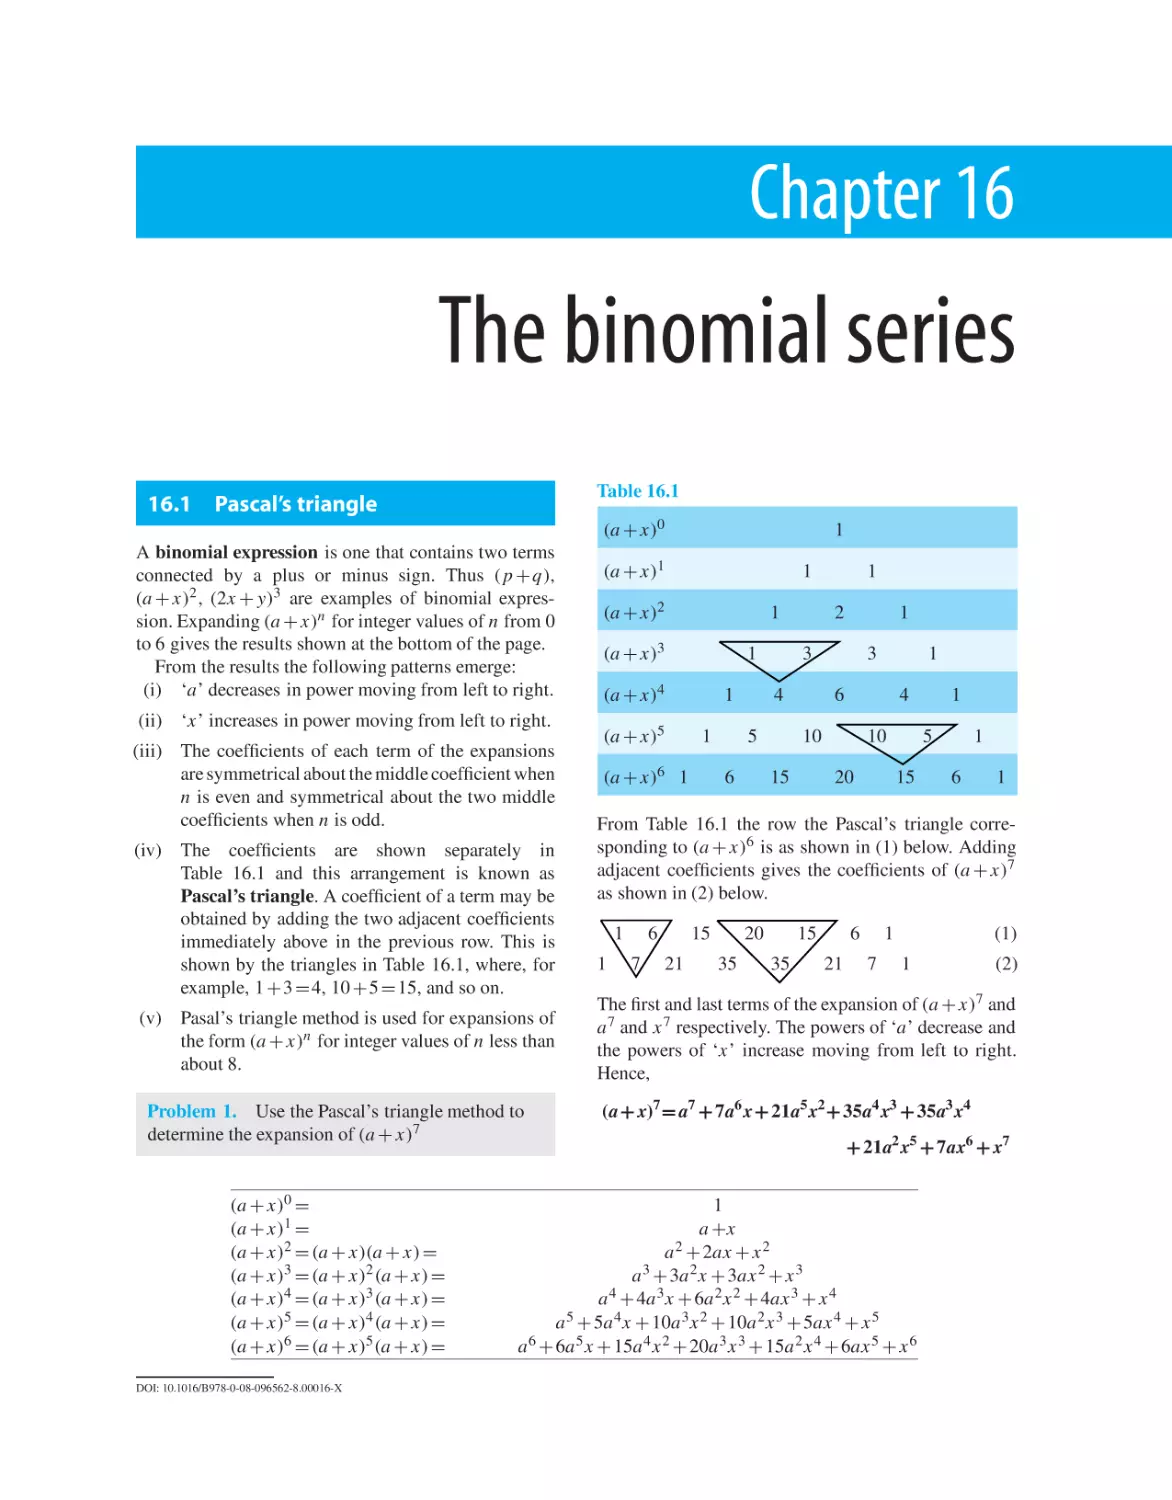 Chapter 16. The binomial series
16.1 Pascal’s triangle